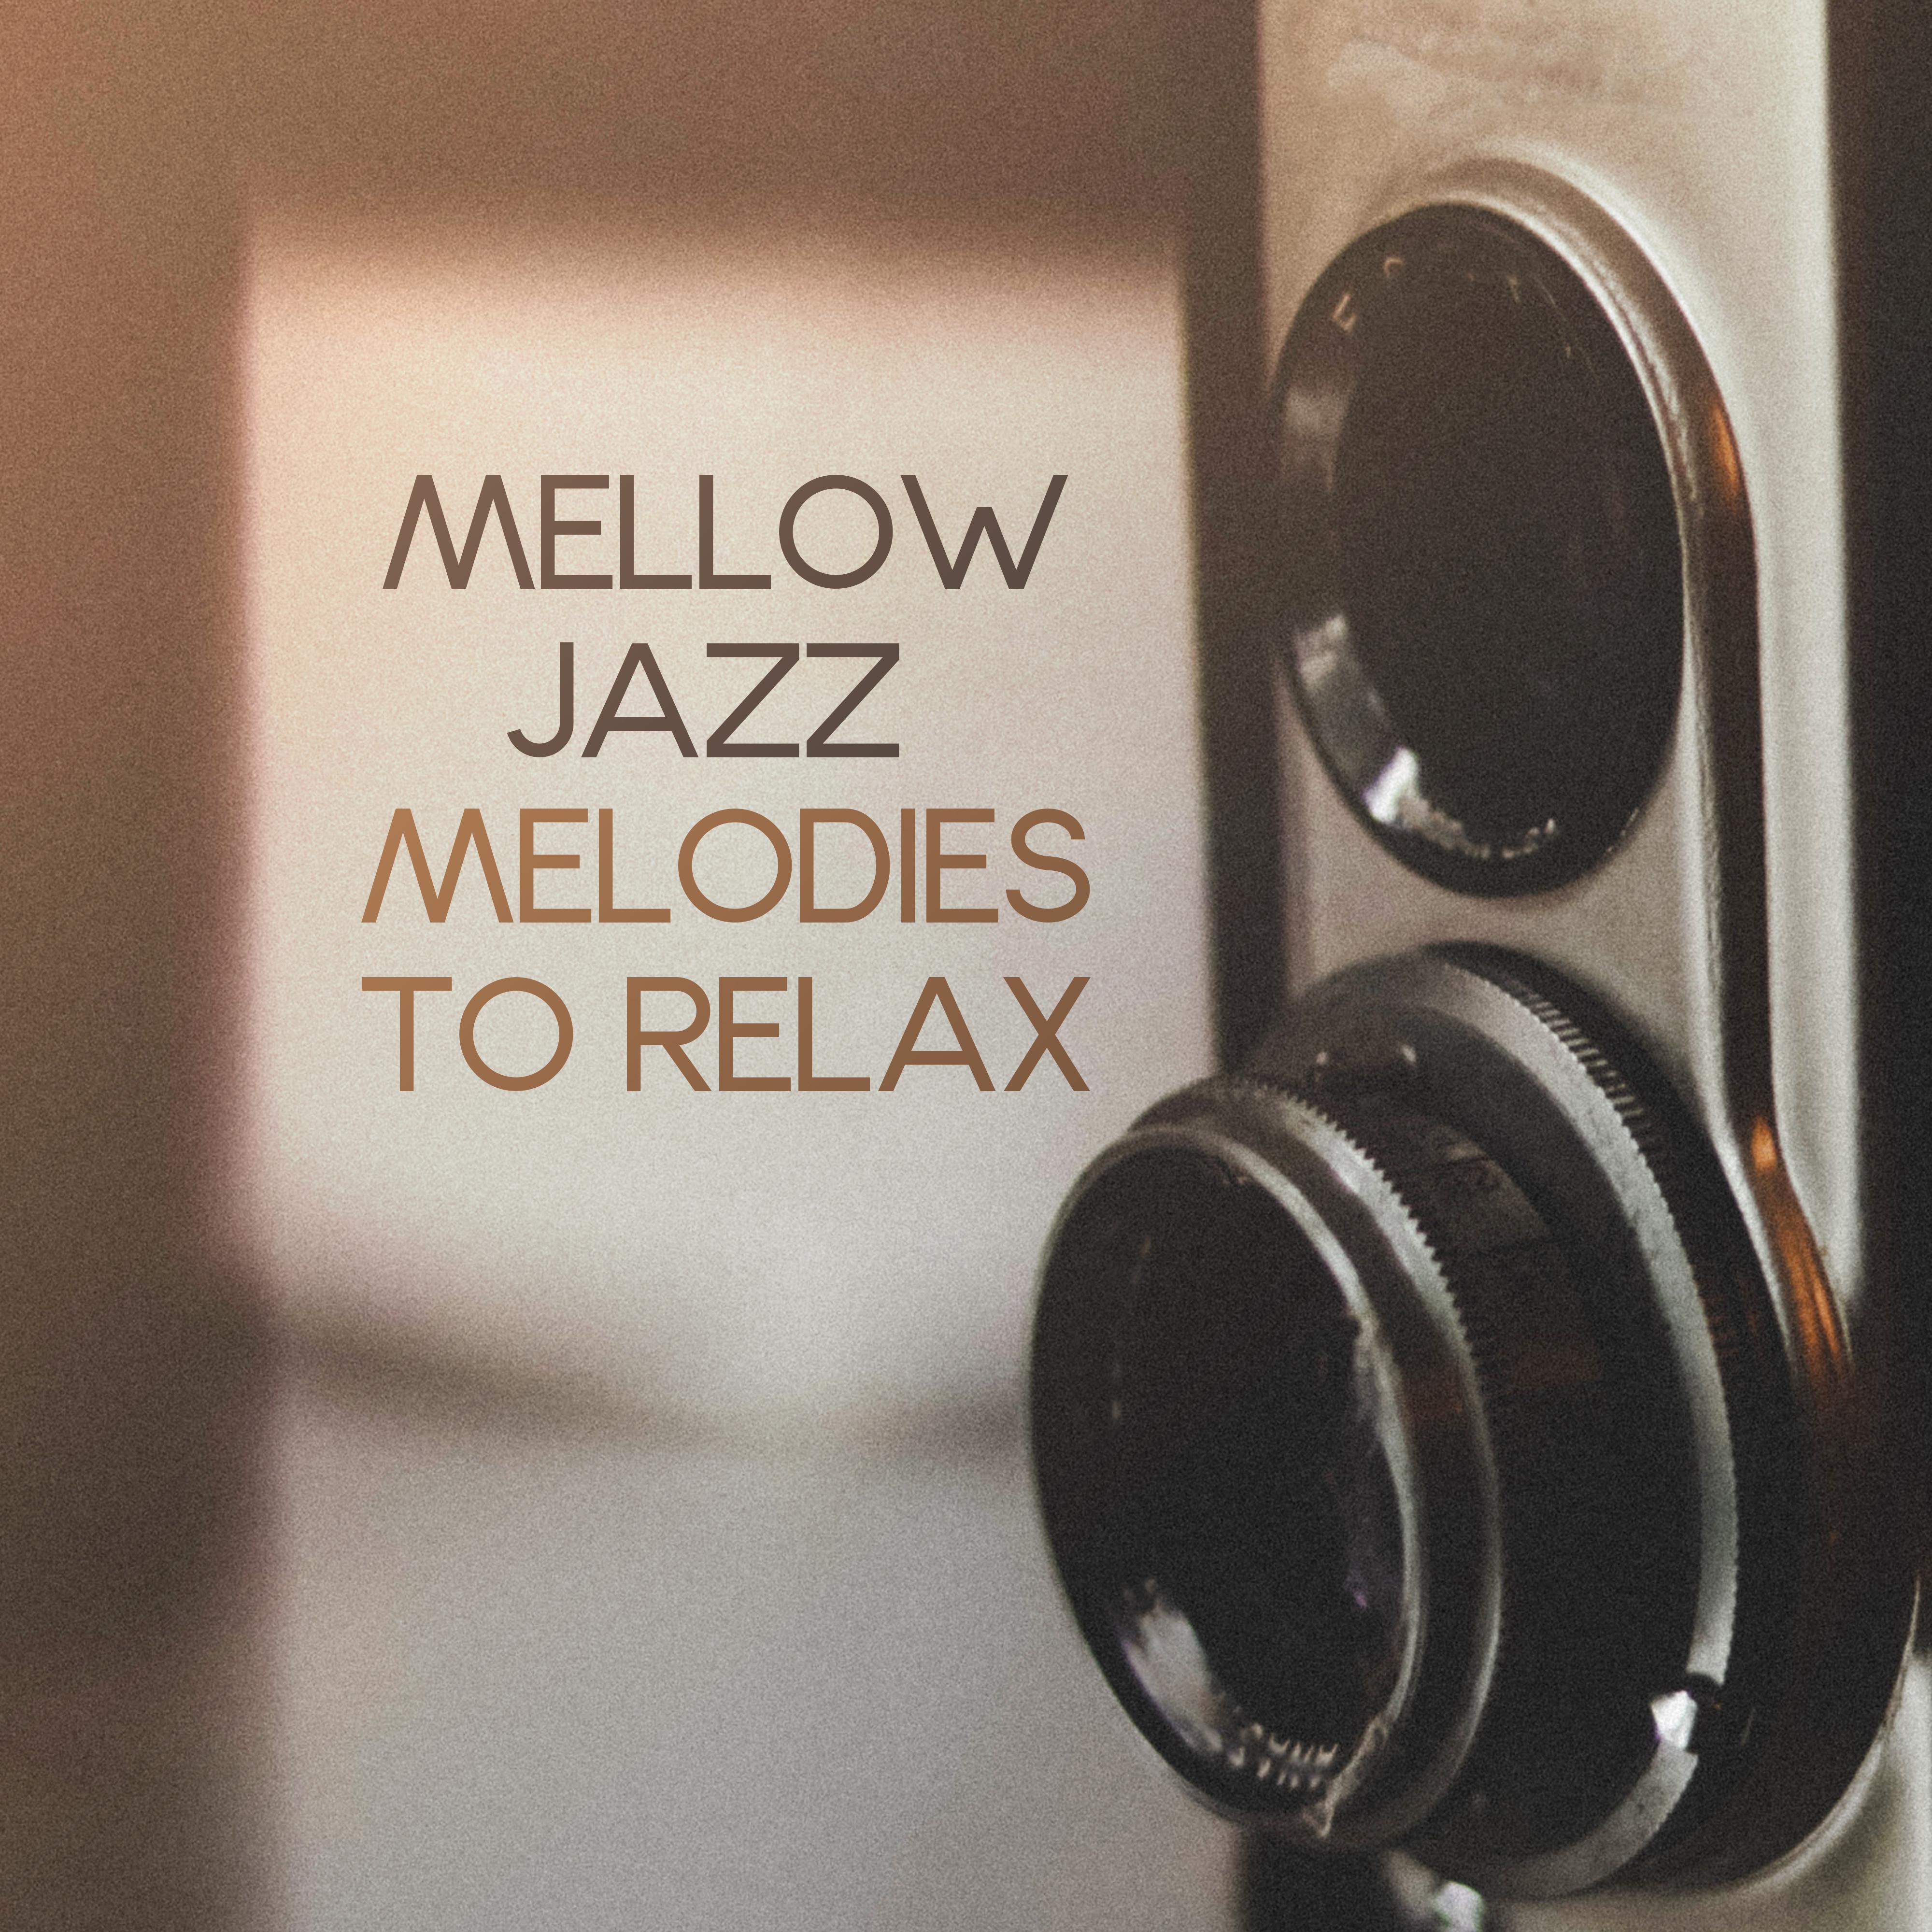 Mellow Jazz Melodies to Relax